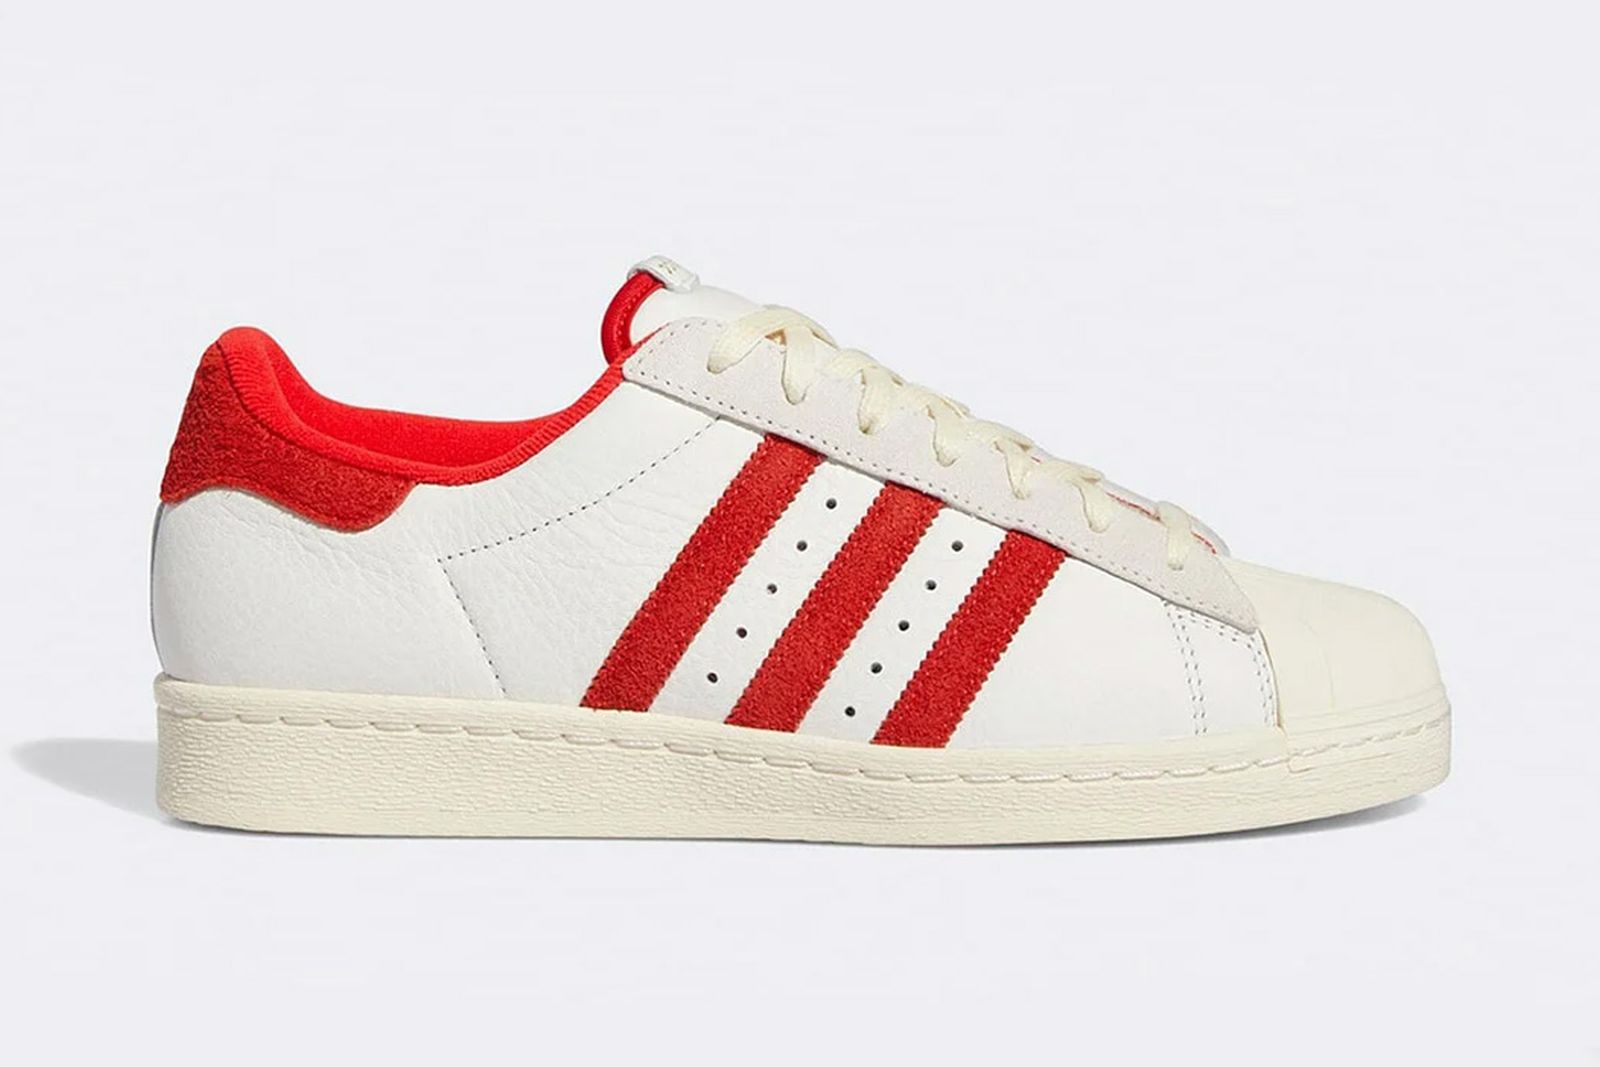 adidas Superstar Vintage Red: Official Images & Rumored Info سيده